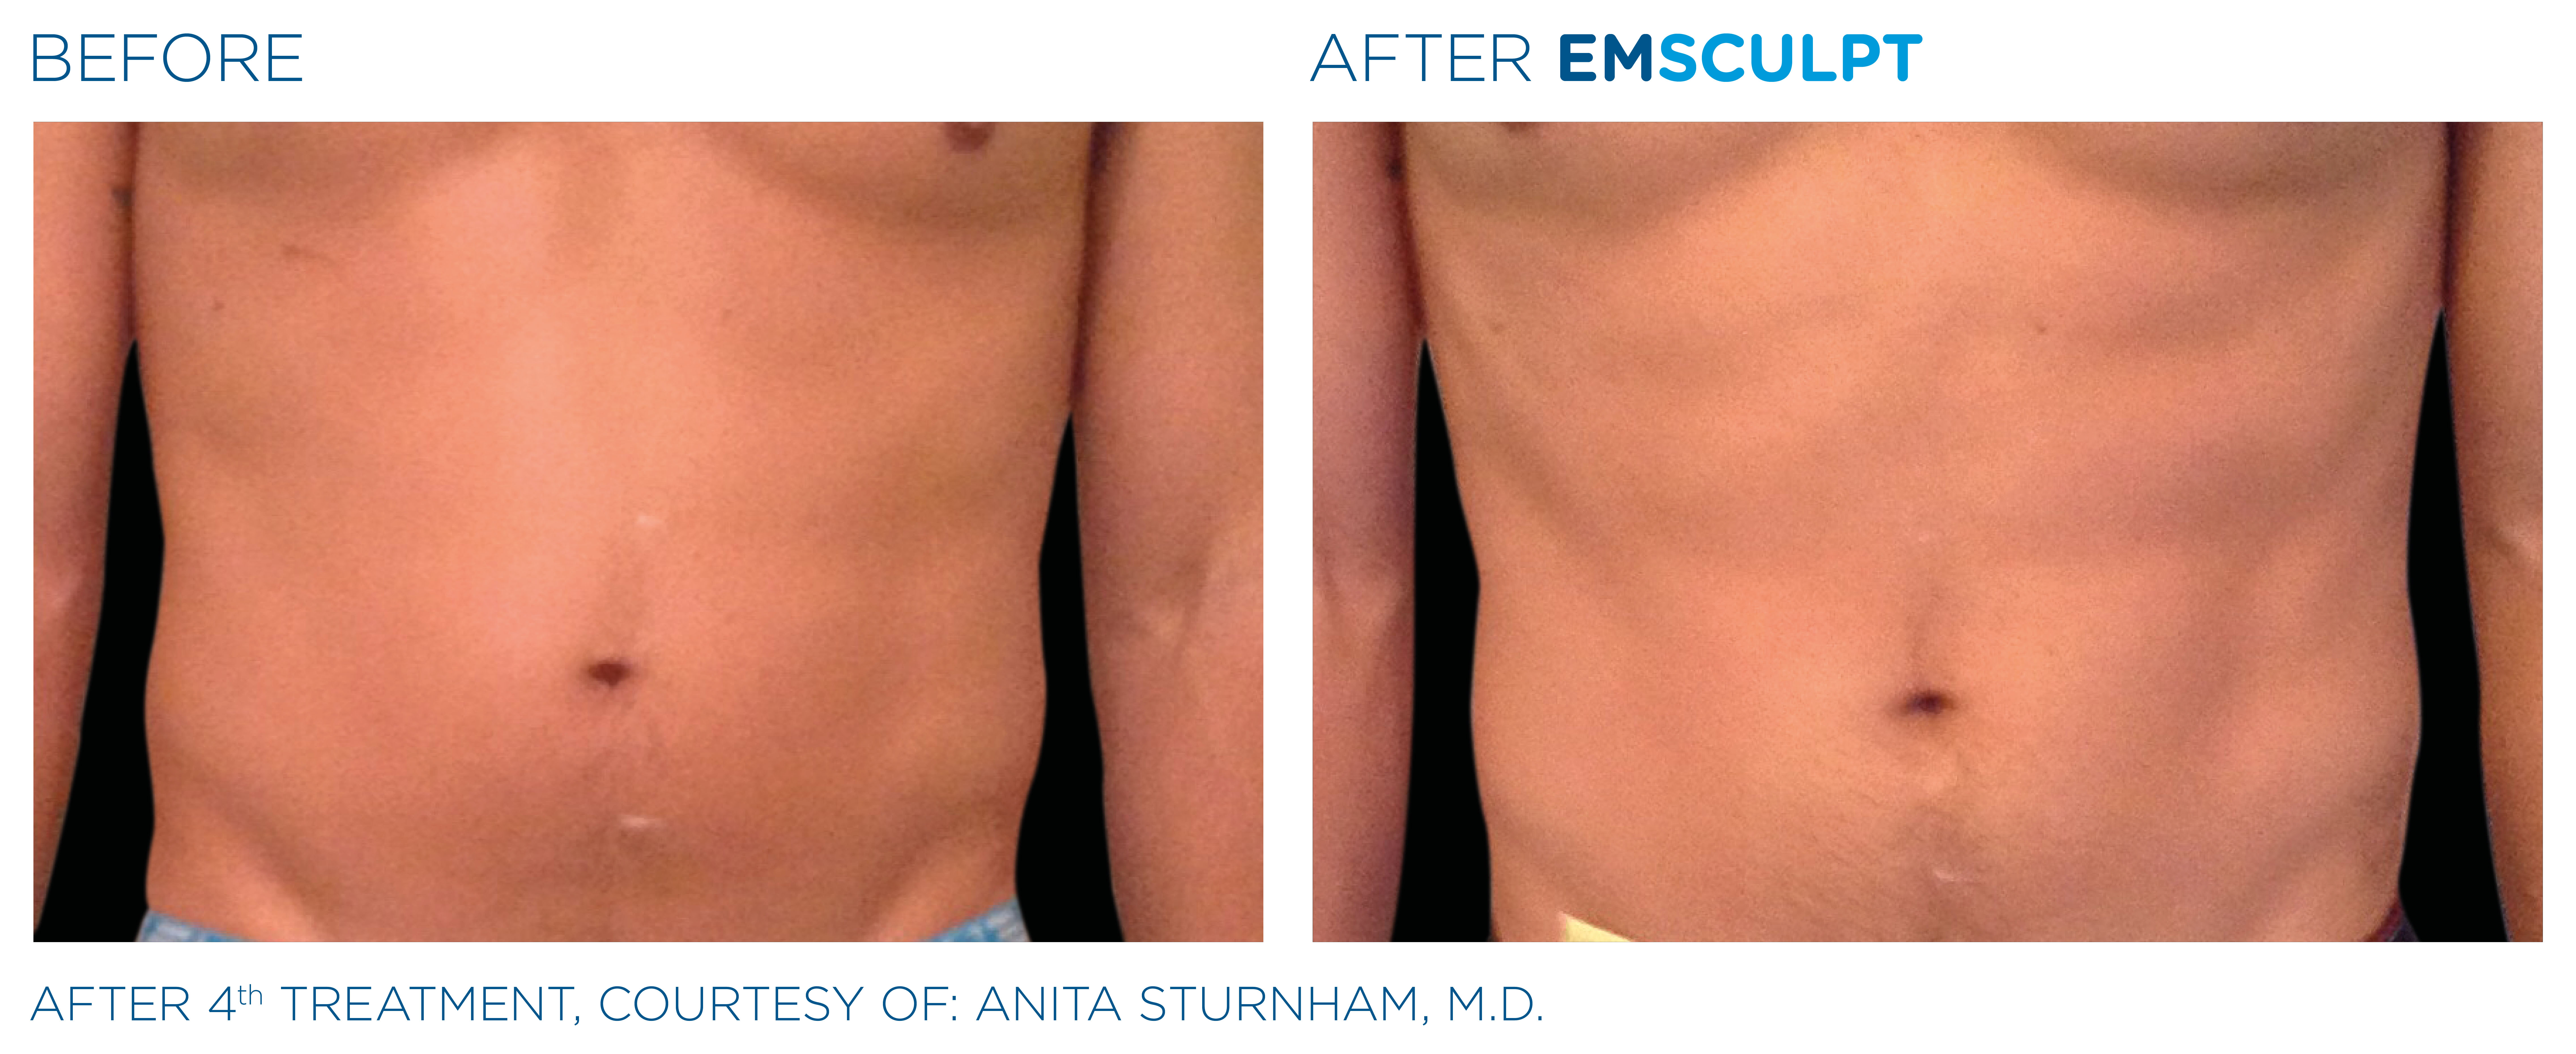 What Is EMSCULPT? - Does It Work? - Cost? - UCRYO Has It!